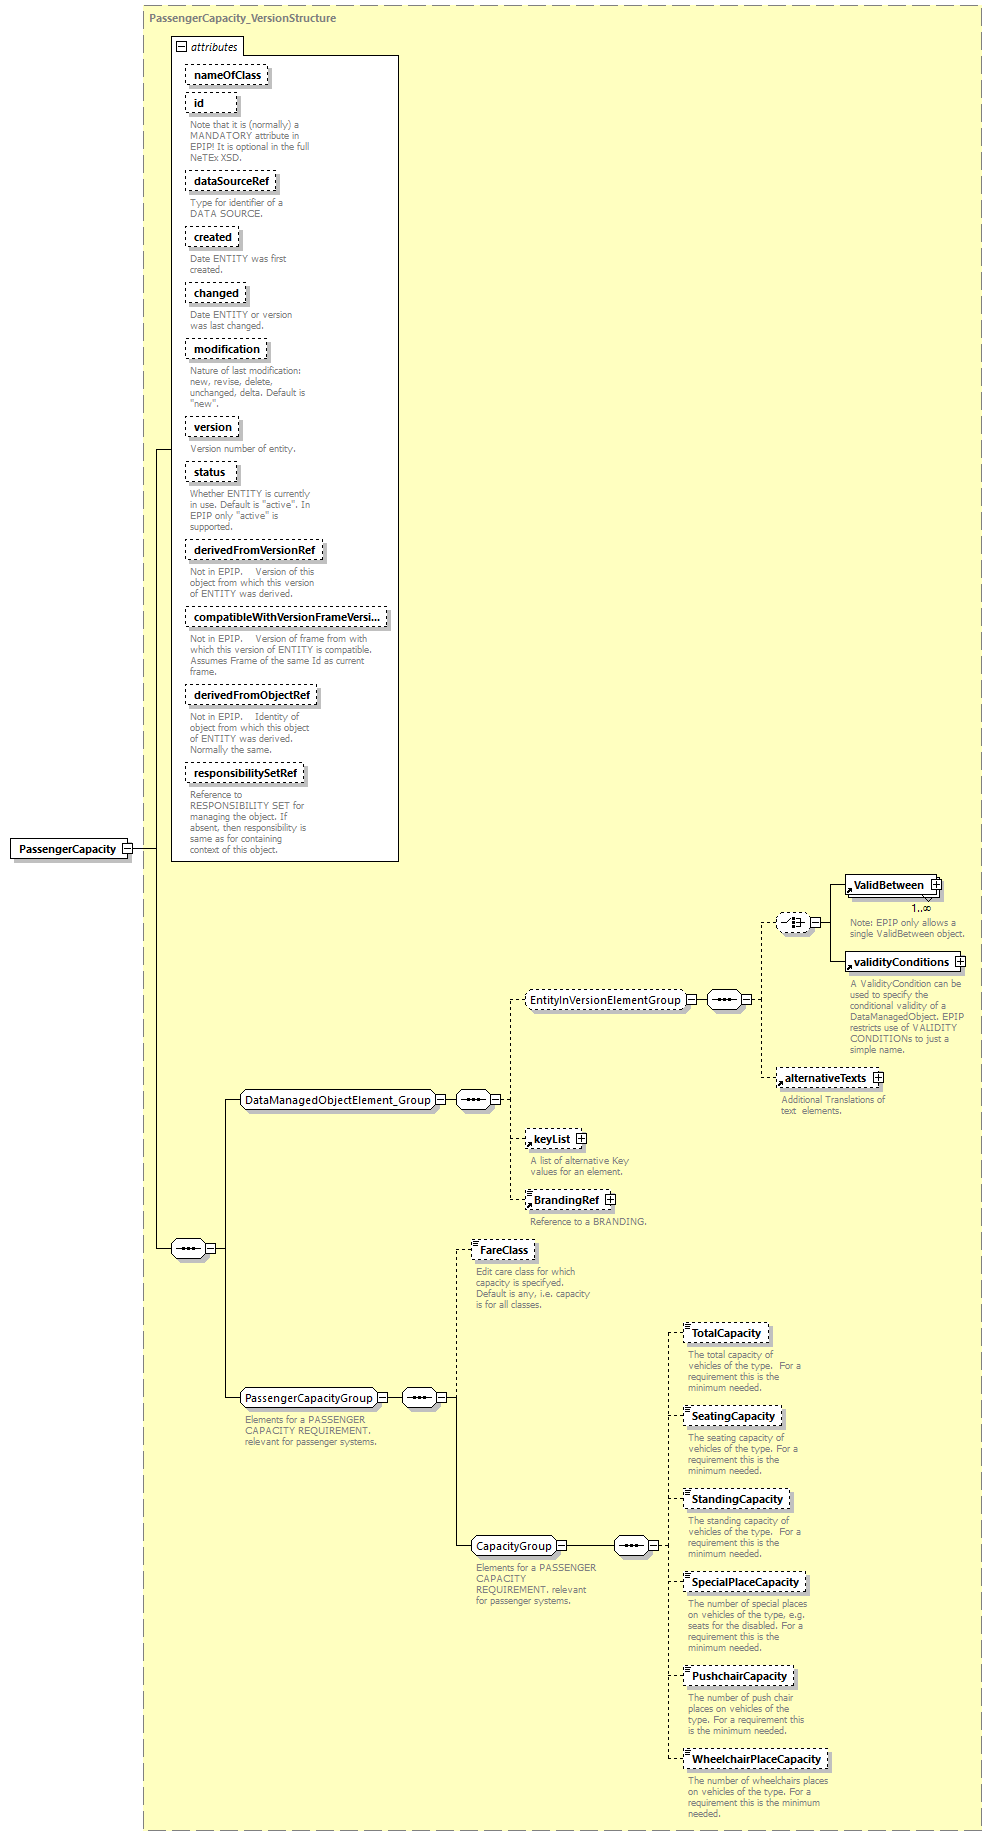 reduced_diagrams/reduced_p314.png